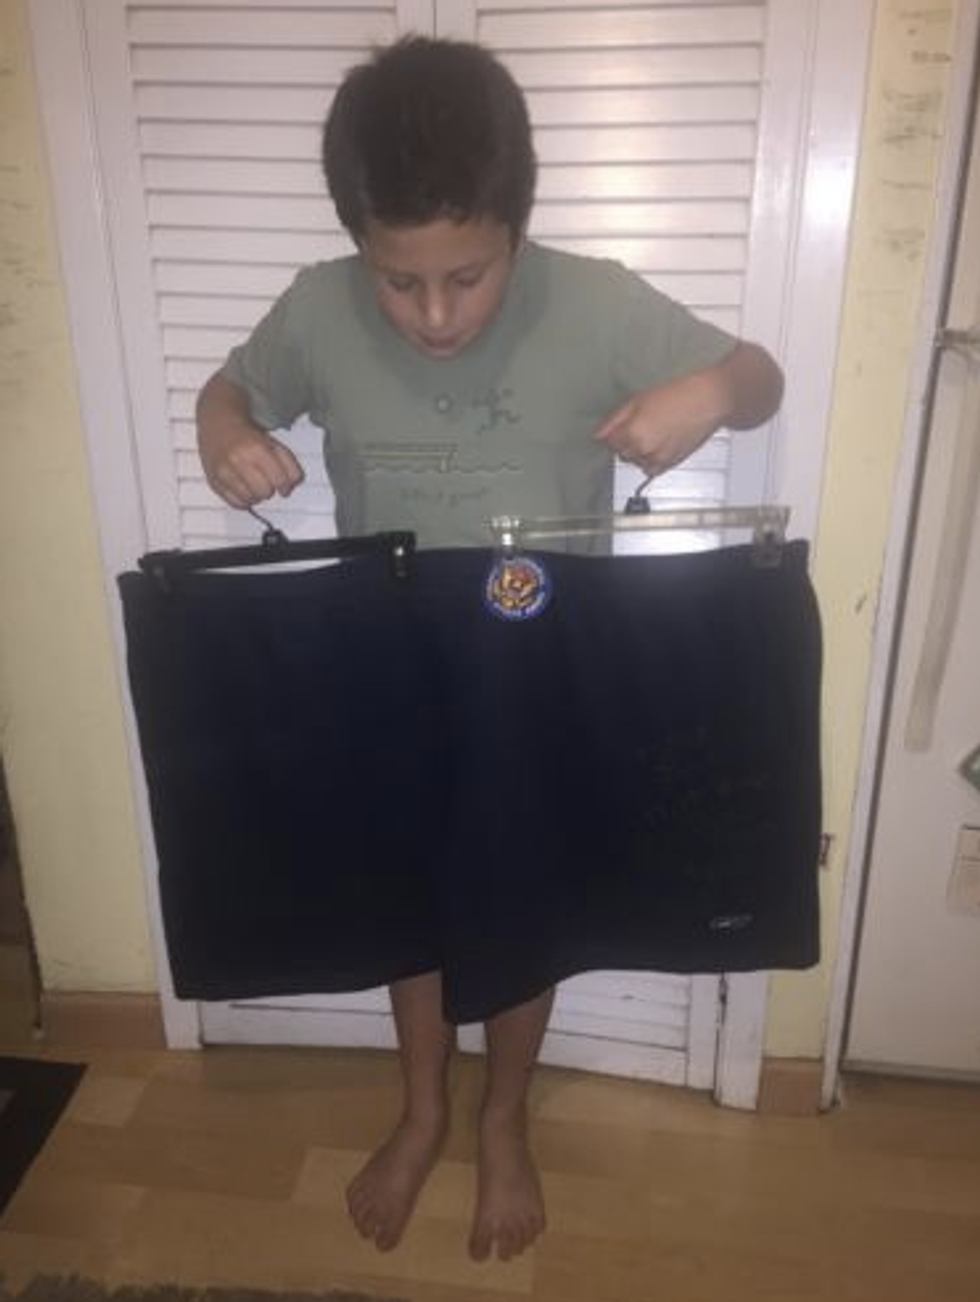 Stay in Shape': Here's the Reason Why a Pair of 60-Inch-Waist Gym Shorts That Allegedly Belonged to Chris Christie Was Sold on eBay for $380.00